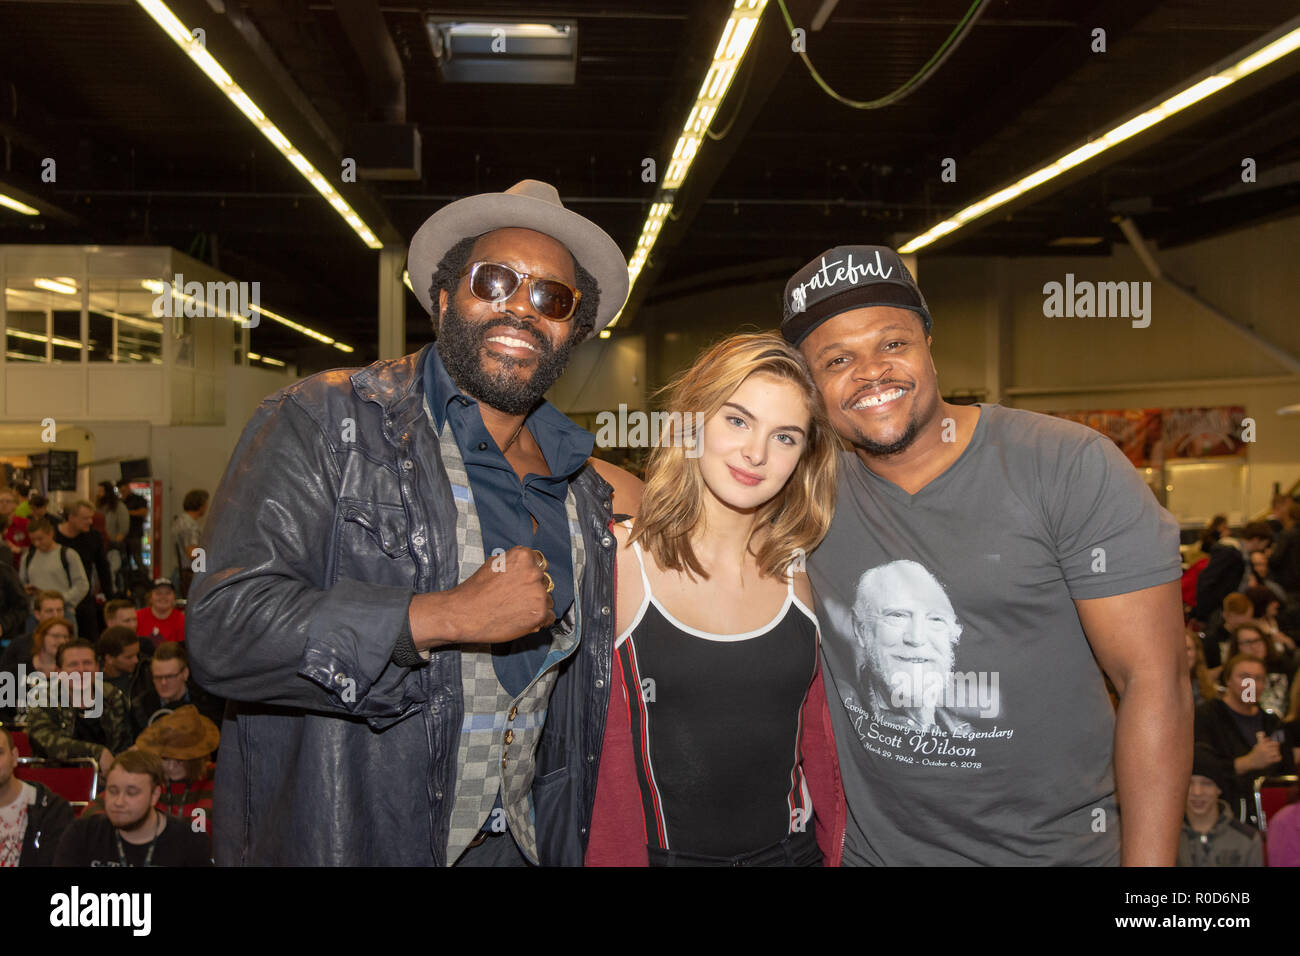 Dortmund, Germany. 3rd November, 2018. Chad L. Coleman, Brighton Sharbino and IronE Singleton at Weekend of Hell 2018, a two day (November 3-4 2018) horror-themed fan convention. Credit: Markus Wissmann/Alamy Live News Stock Photo